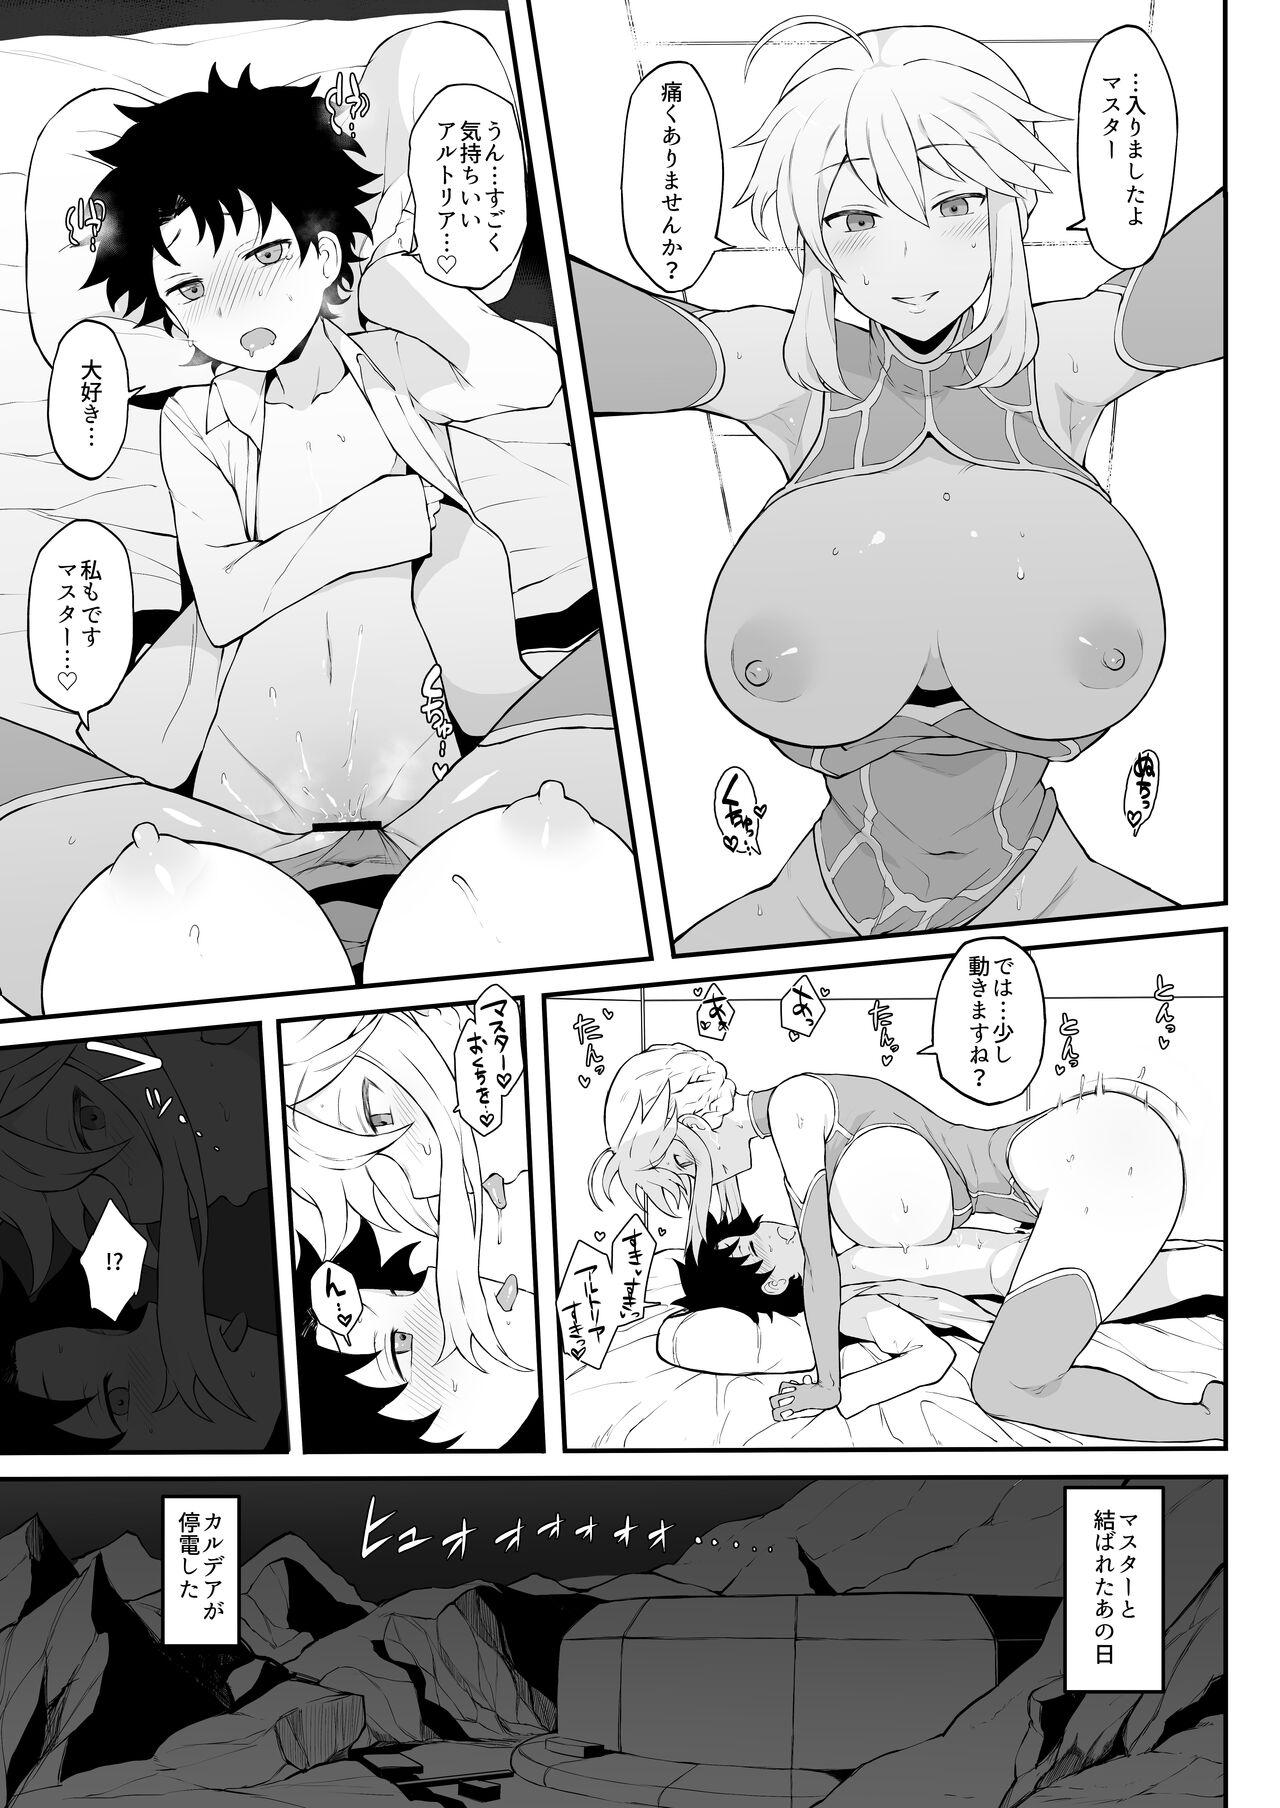 Hiddencam No Title - Fate grand order Trimmed - Page 3